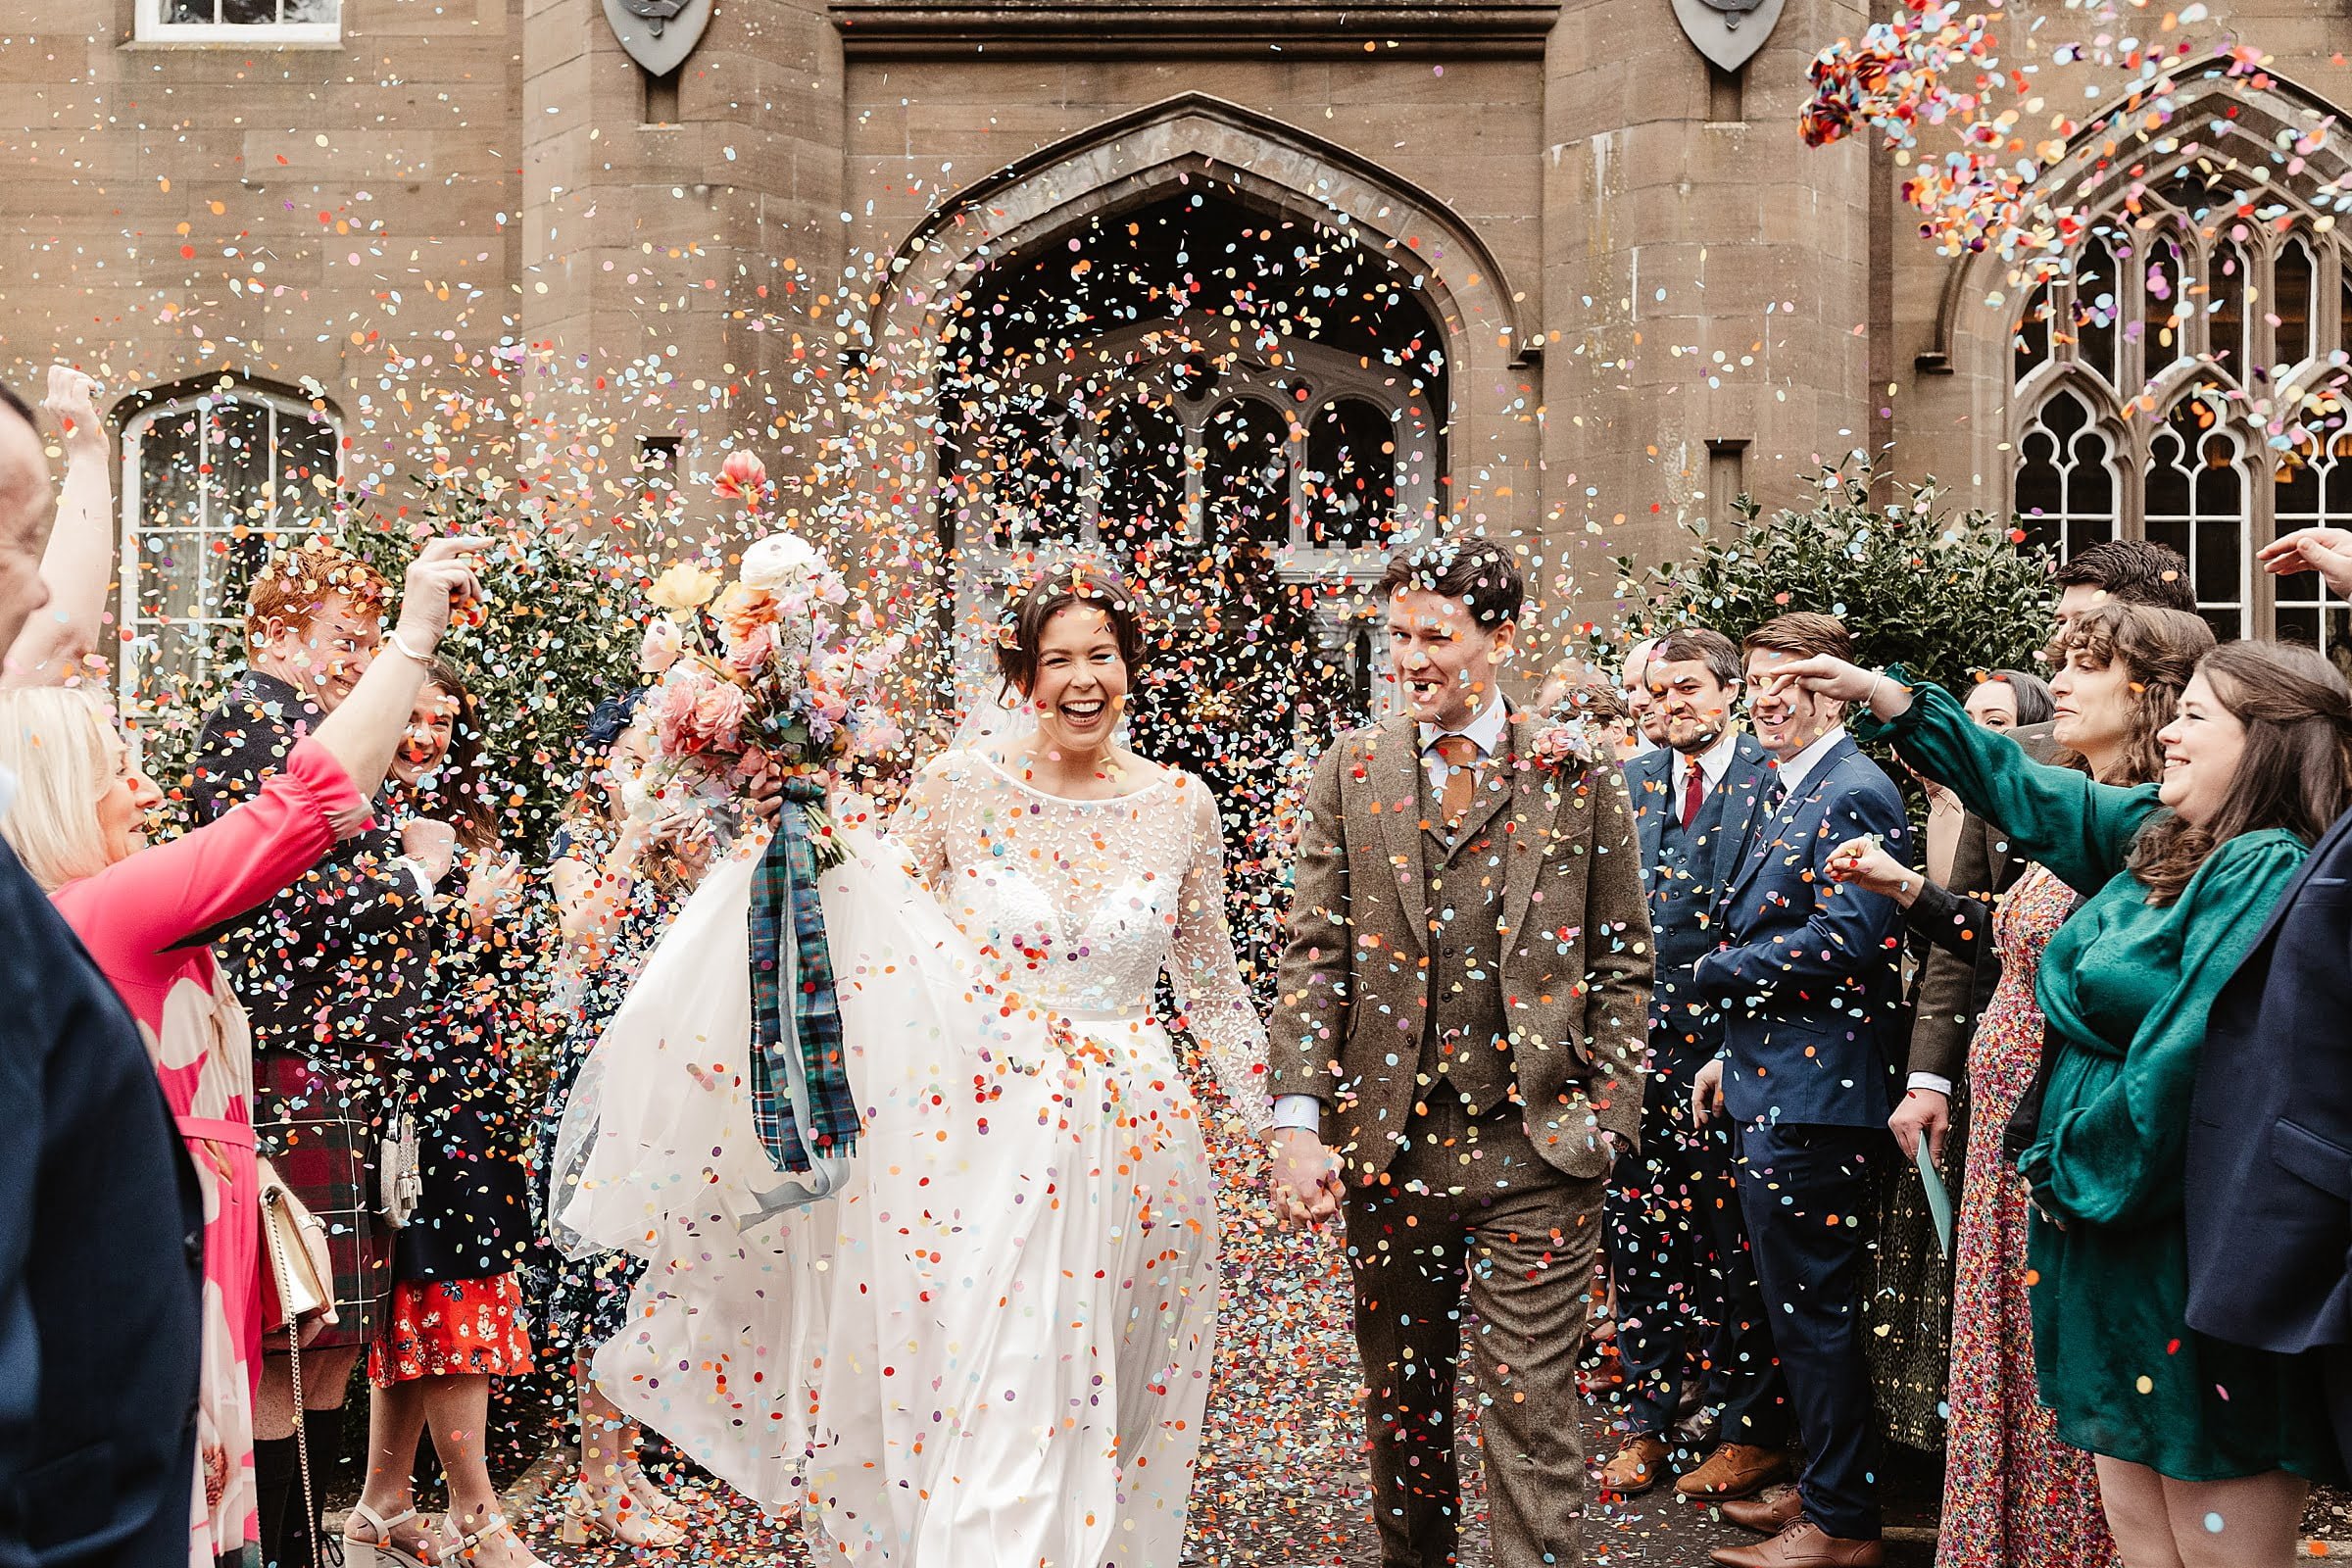 Drumtochty castle confetti throw bride and groom colourful